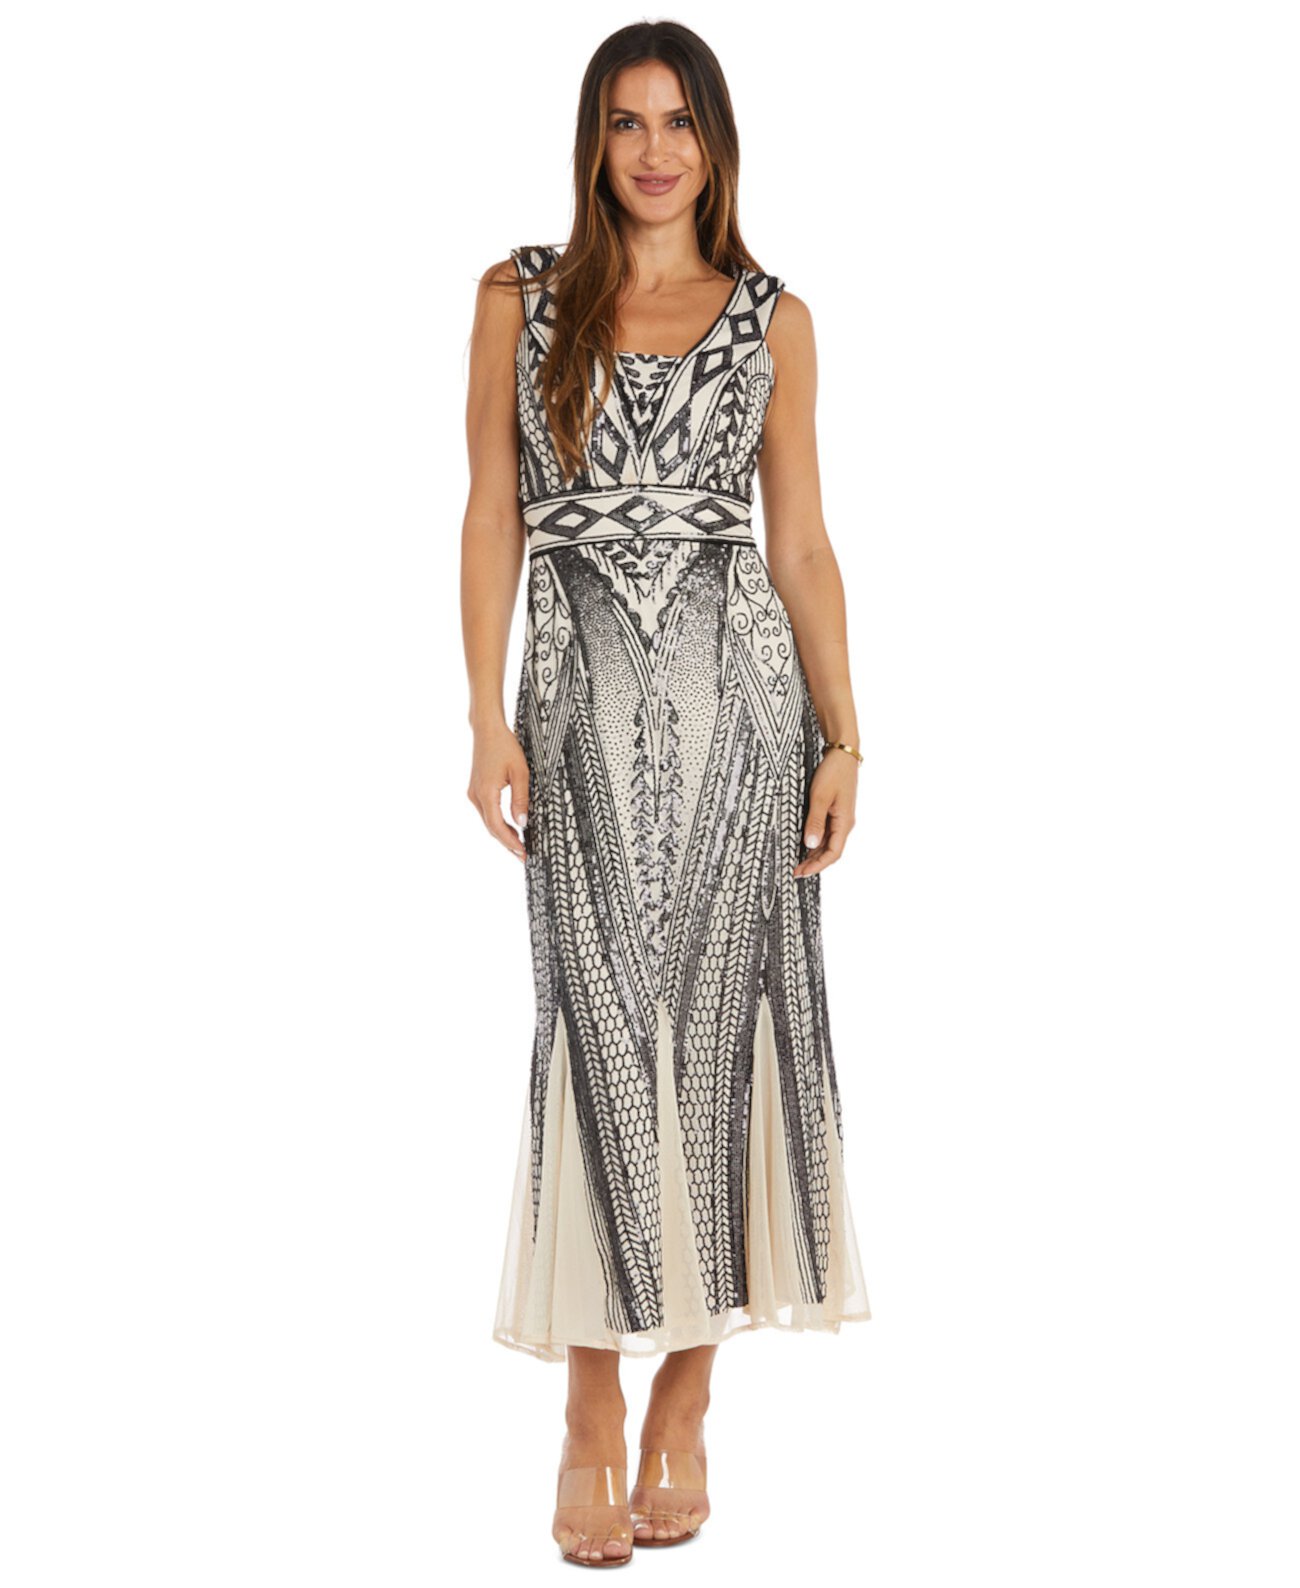 Women's Sequin Embellished Sleeveless Gown R & M Richards